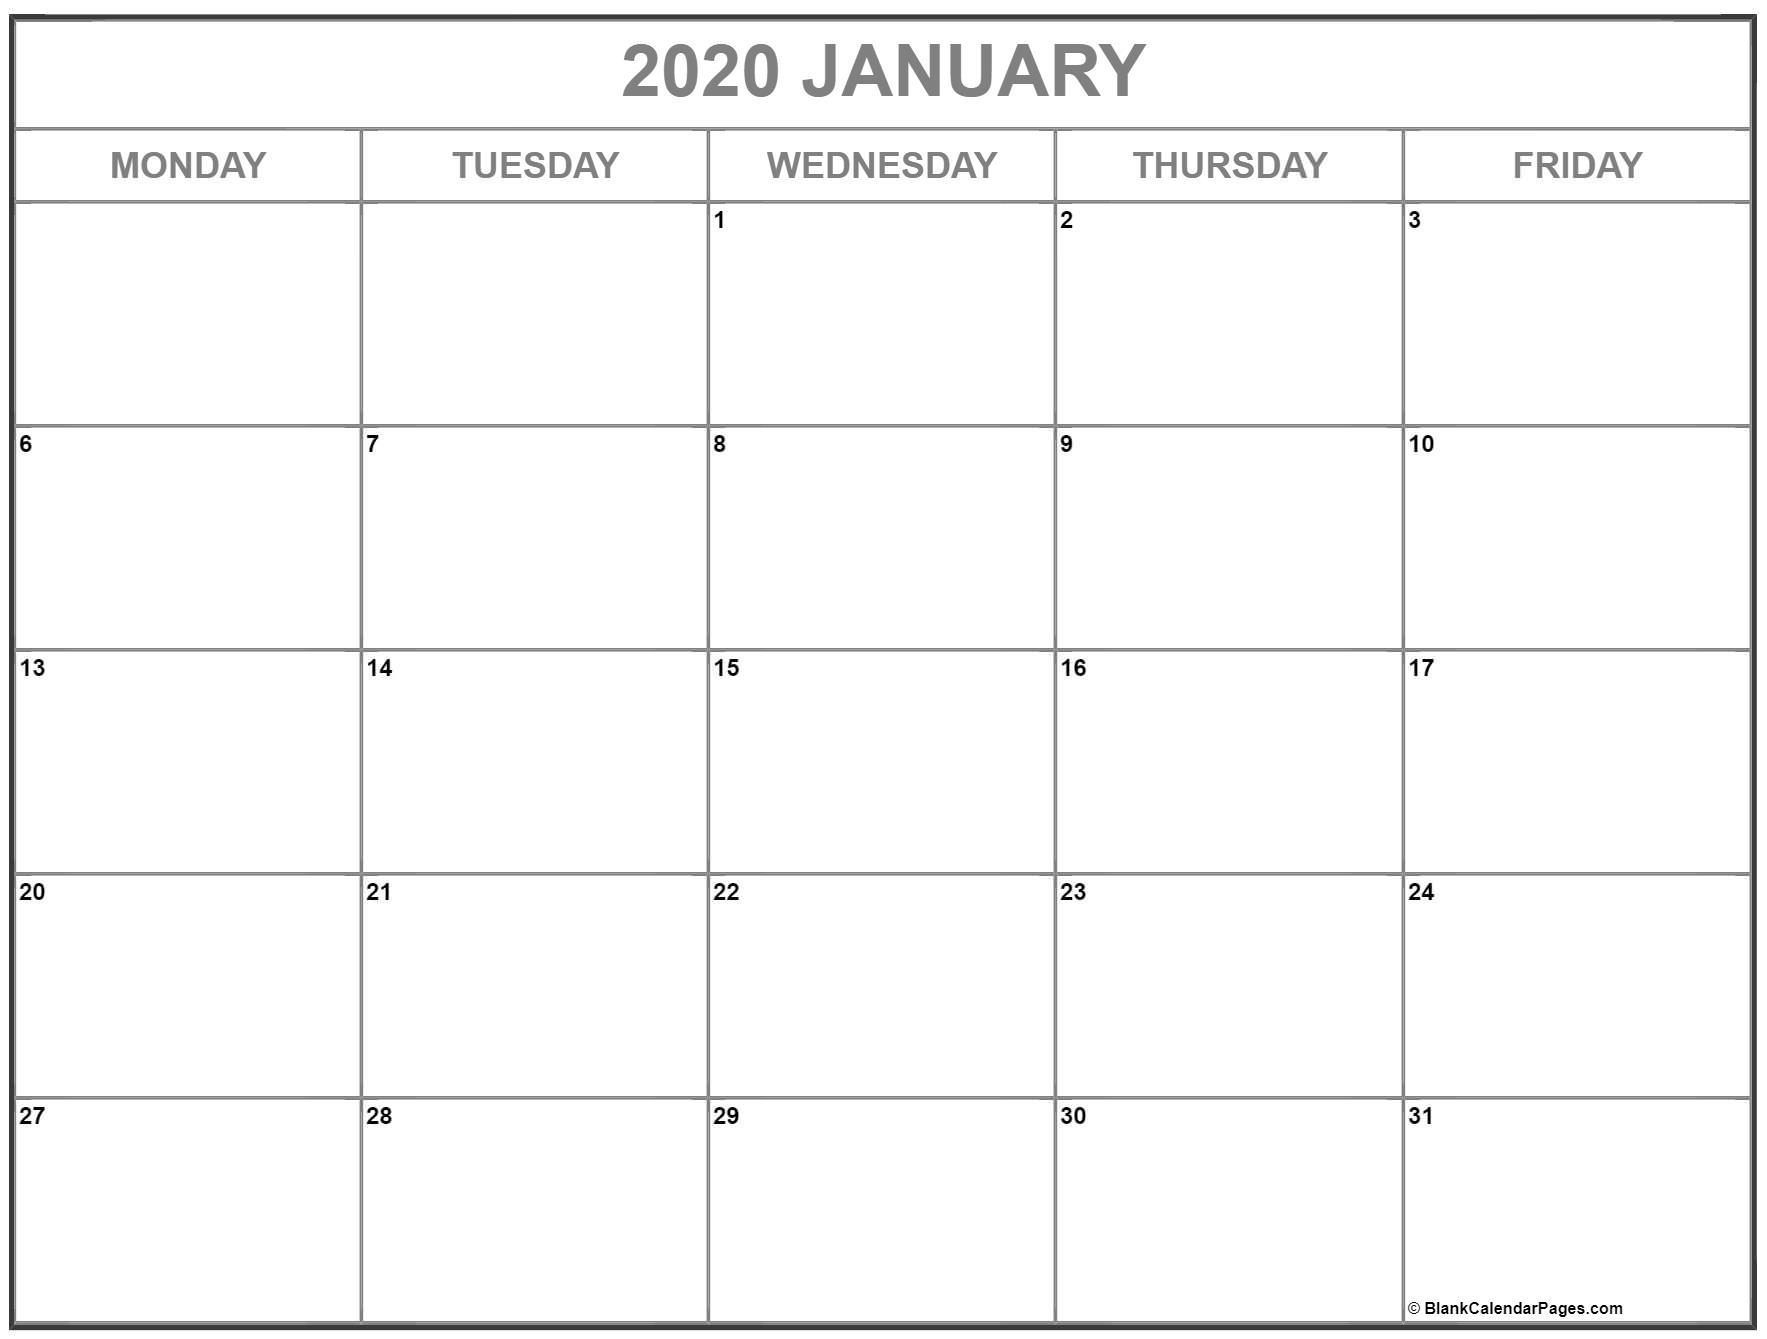 how to monday to friday printable monthly calendar in 2020